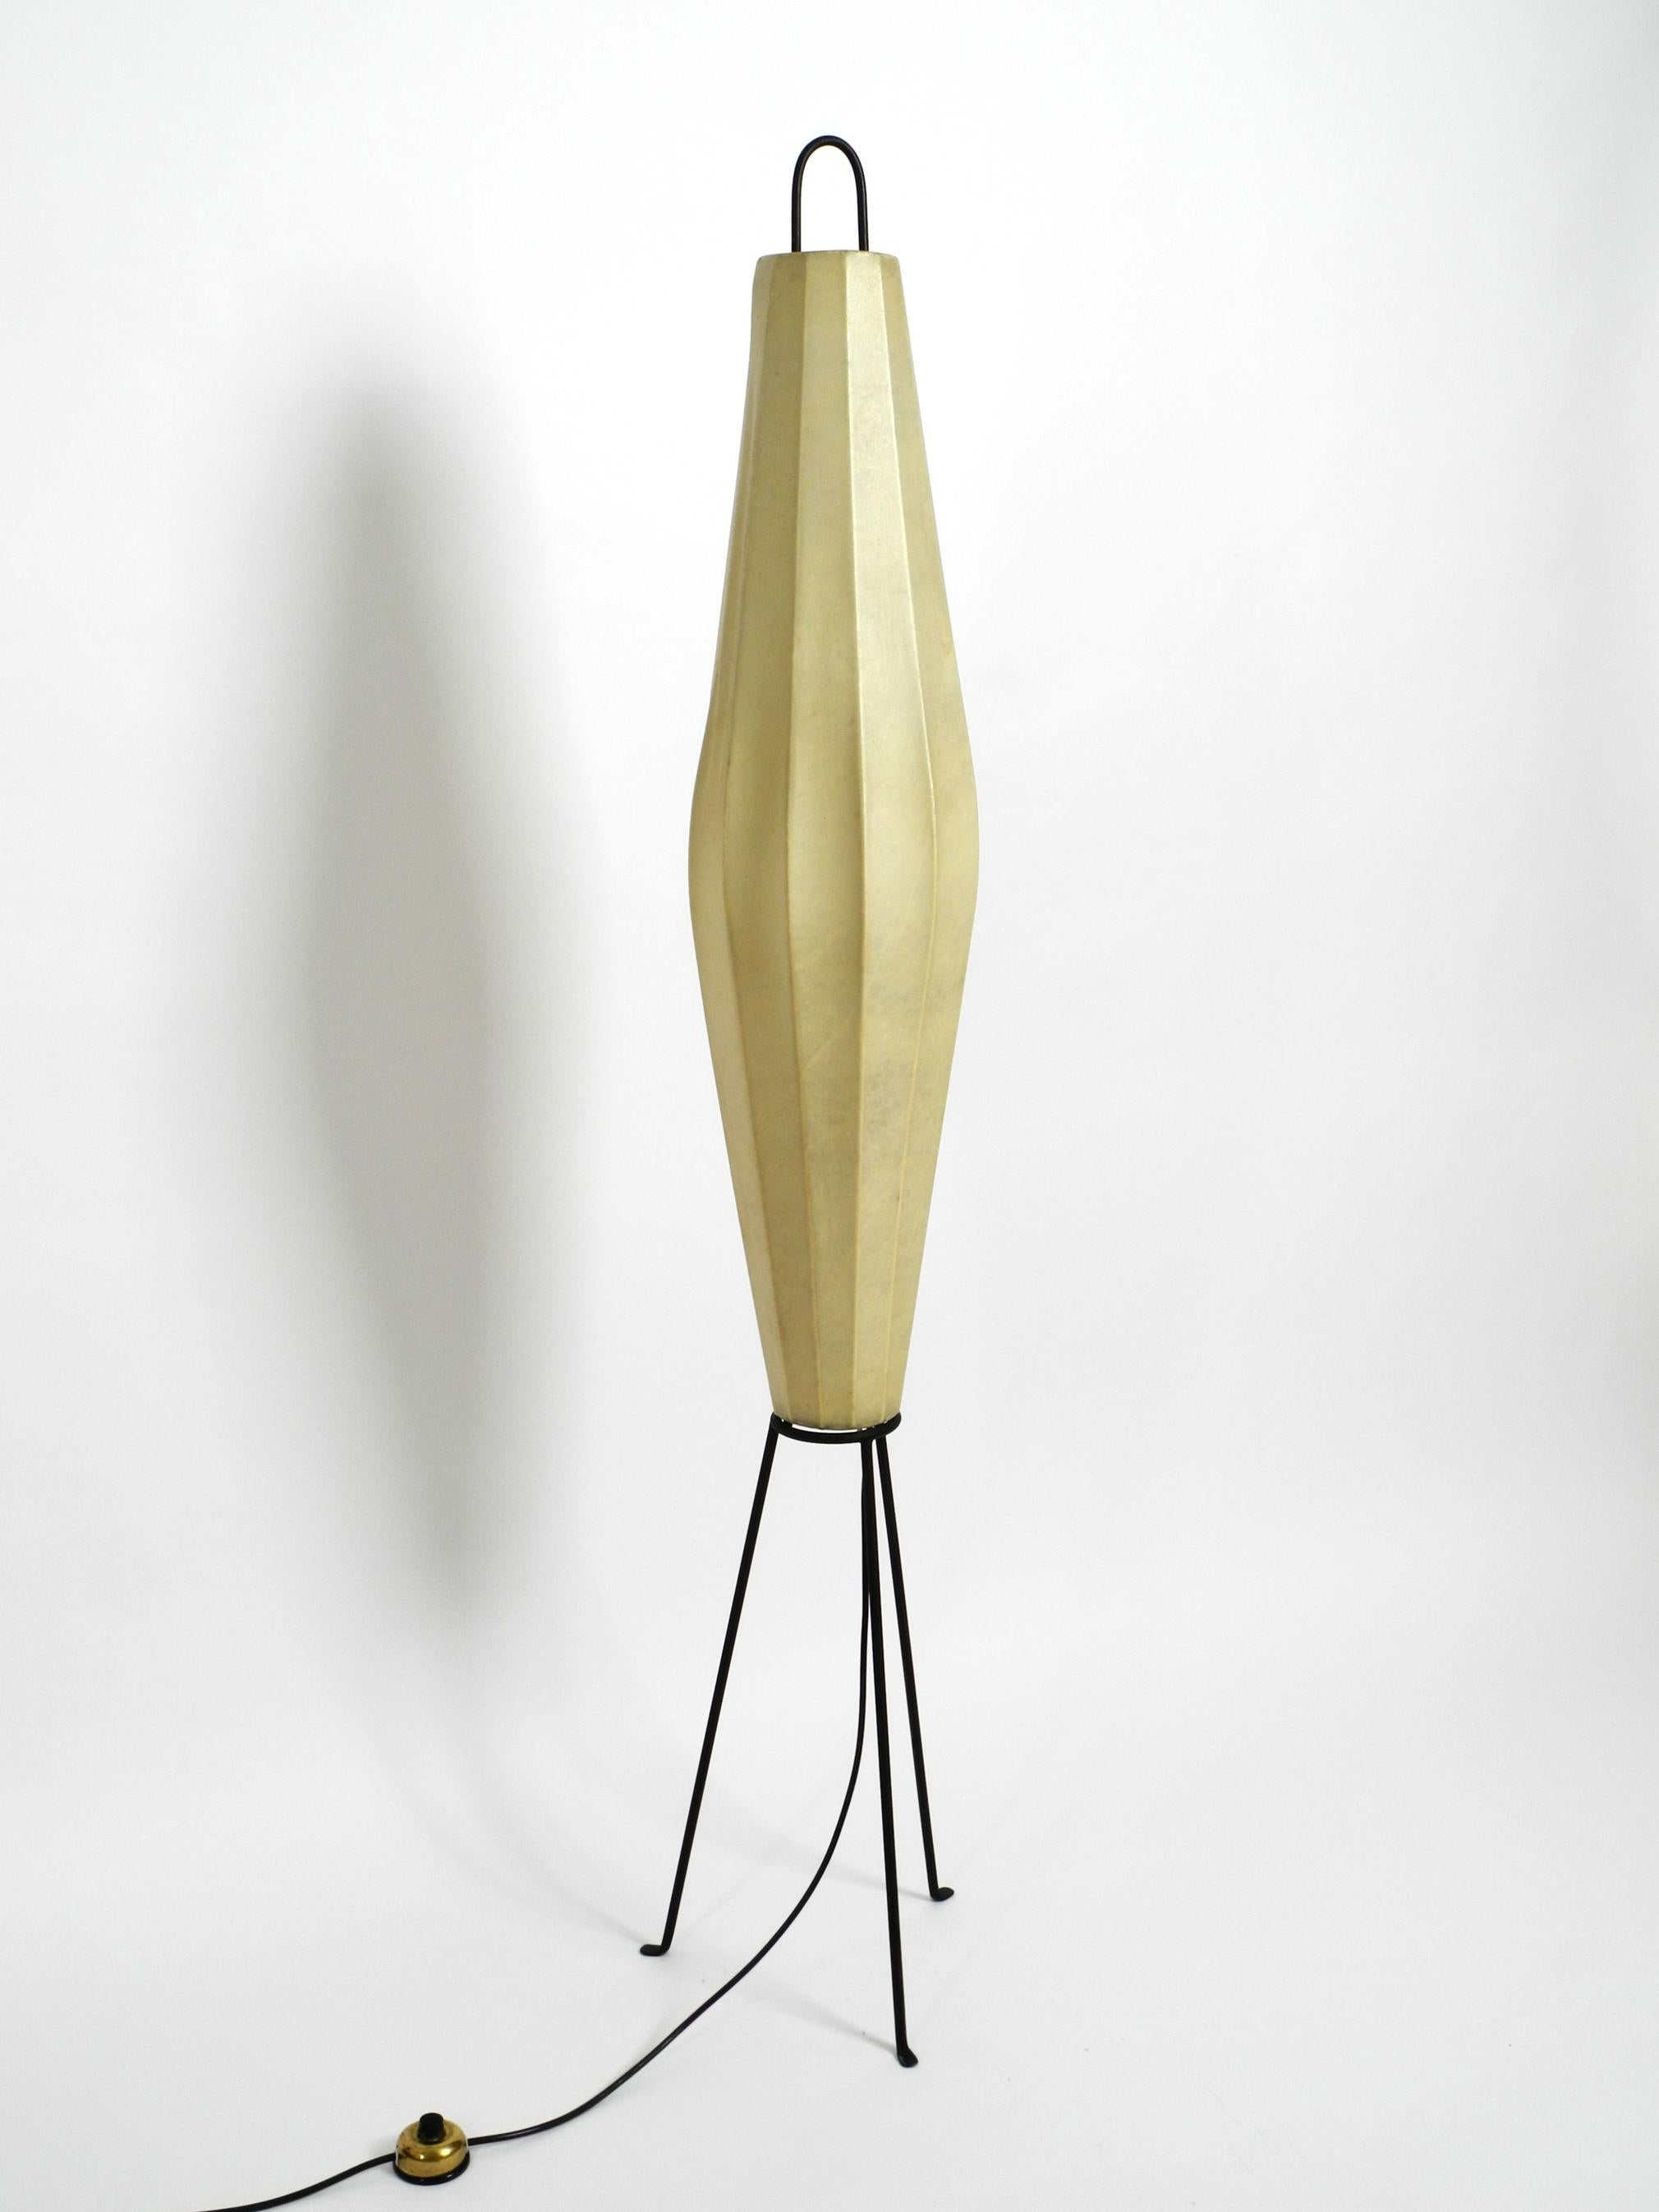 Very rare huge Mid-Century Modern tripod cocoon floor lamp. Extra large height of 163 cm.
Manufacturers Vereingte Werkstätten. Made in Germany. With original logo on the frame.
Great Minimalist 1950s design. Very rare in this size.
Creates a very